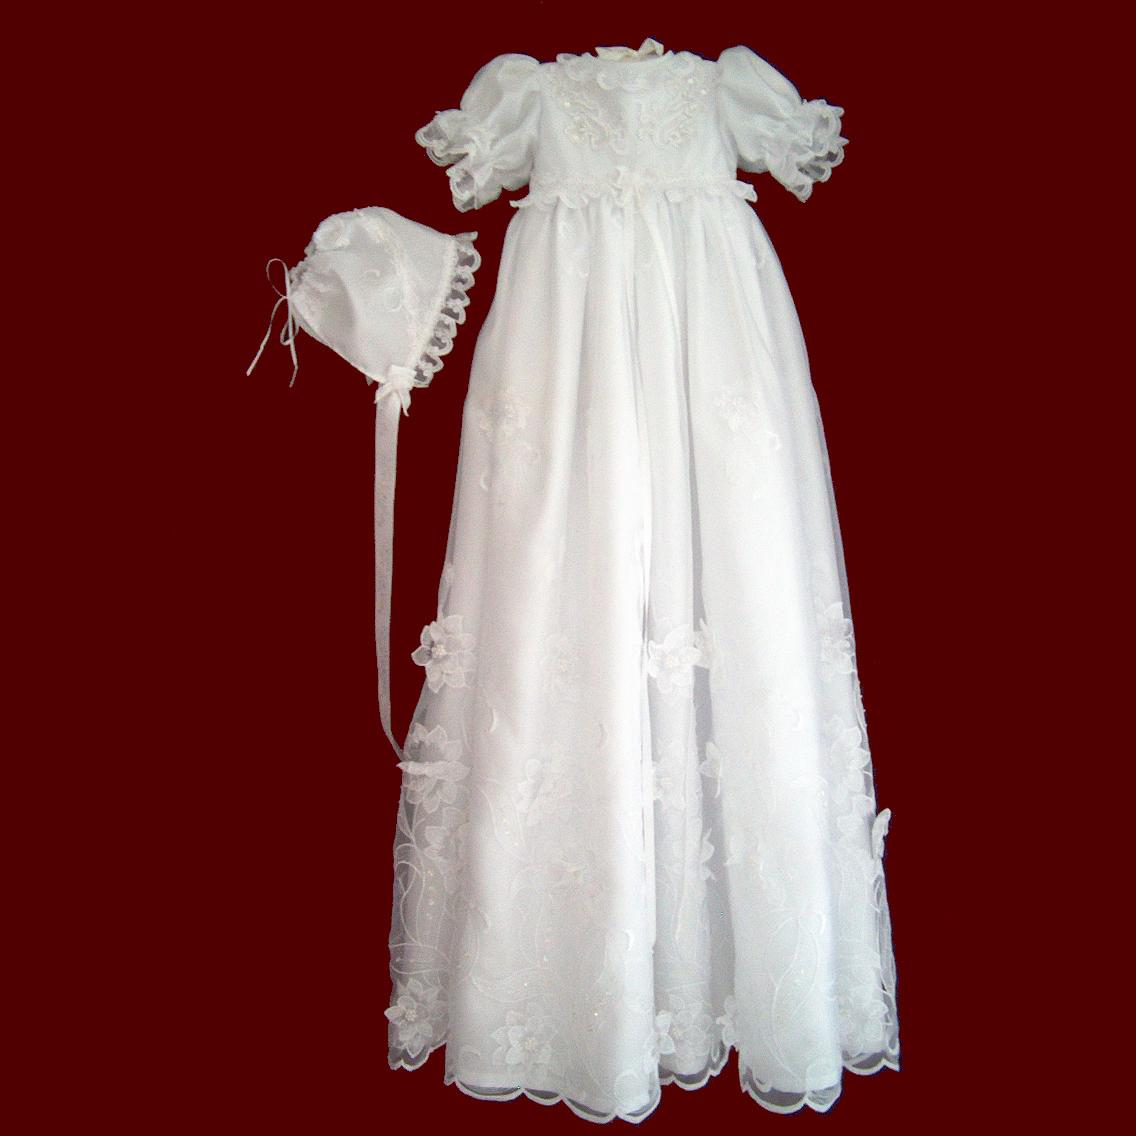 Beaded Organza With Flowers Christening Gown, Slip & Bonnet